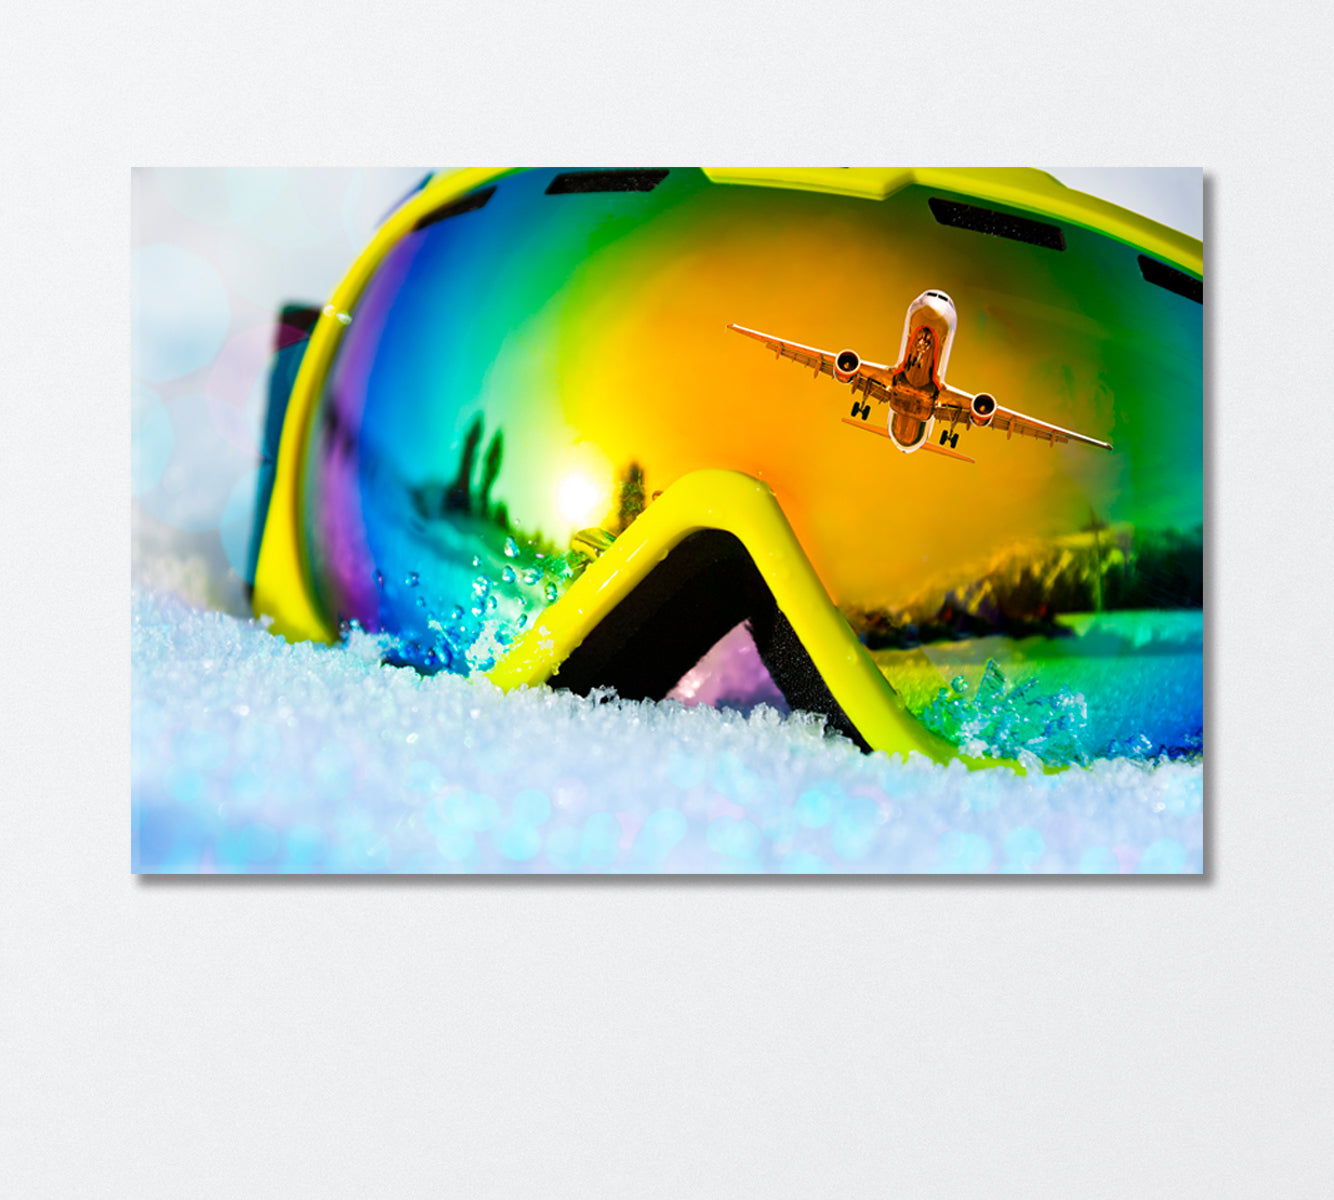 Reflection of Flying Plane in Ski Mask Canvas Print-Canvas Print-CetArt-1 Panel-24x16 inches-CetArt